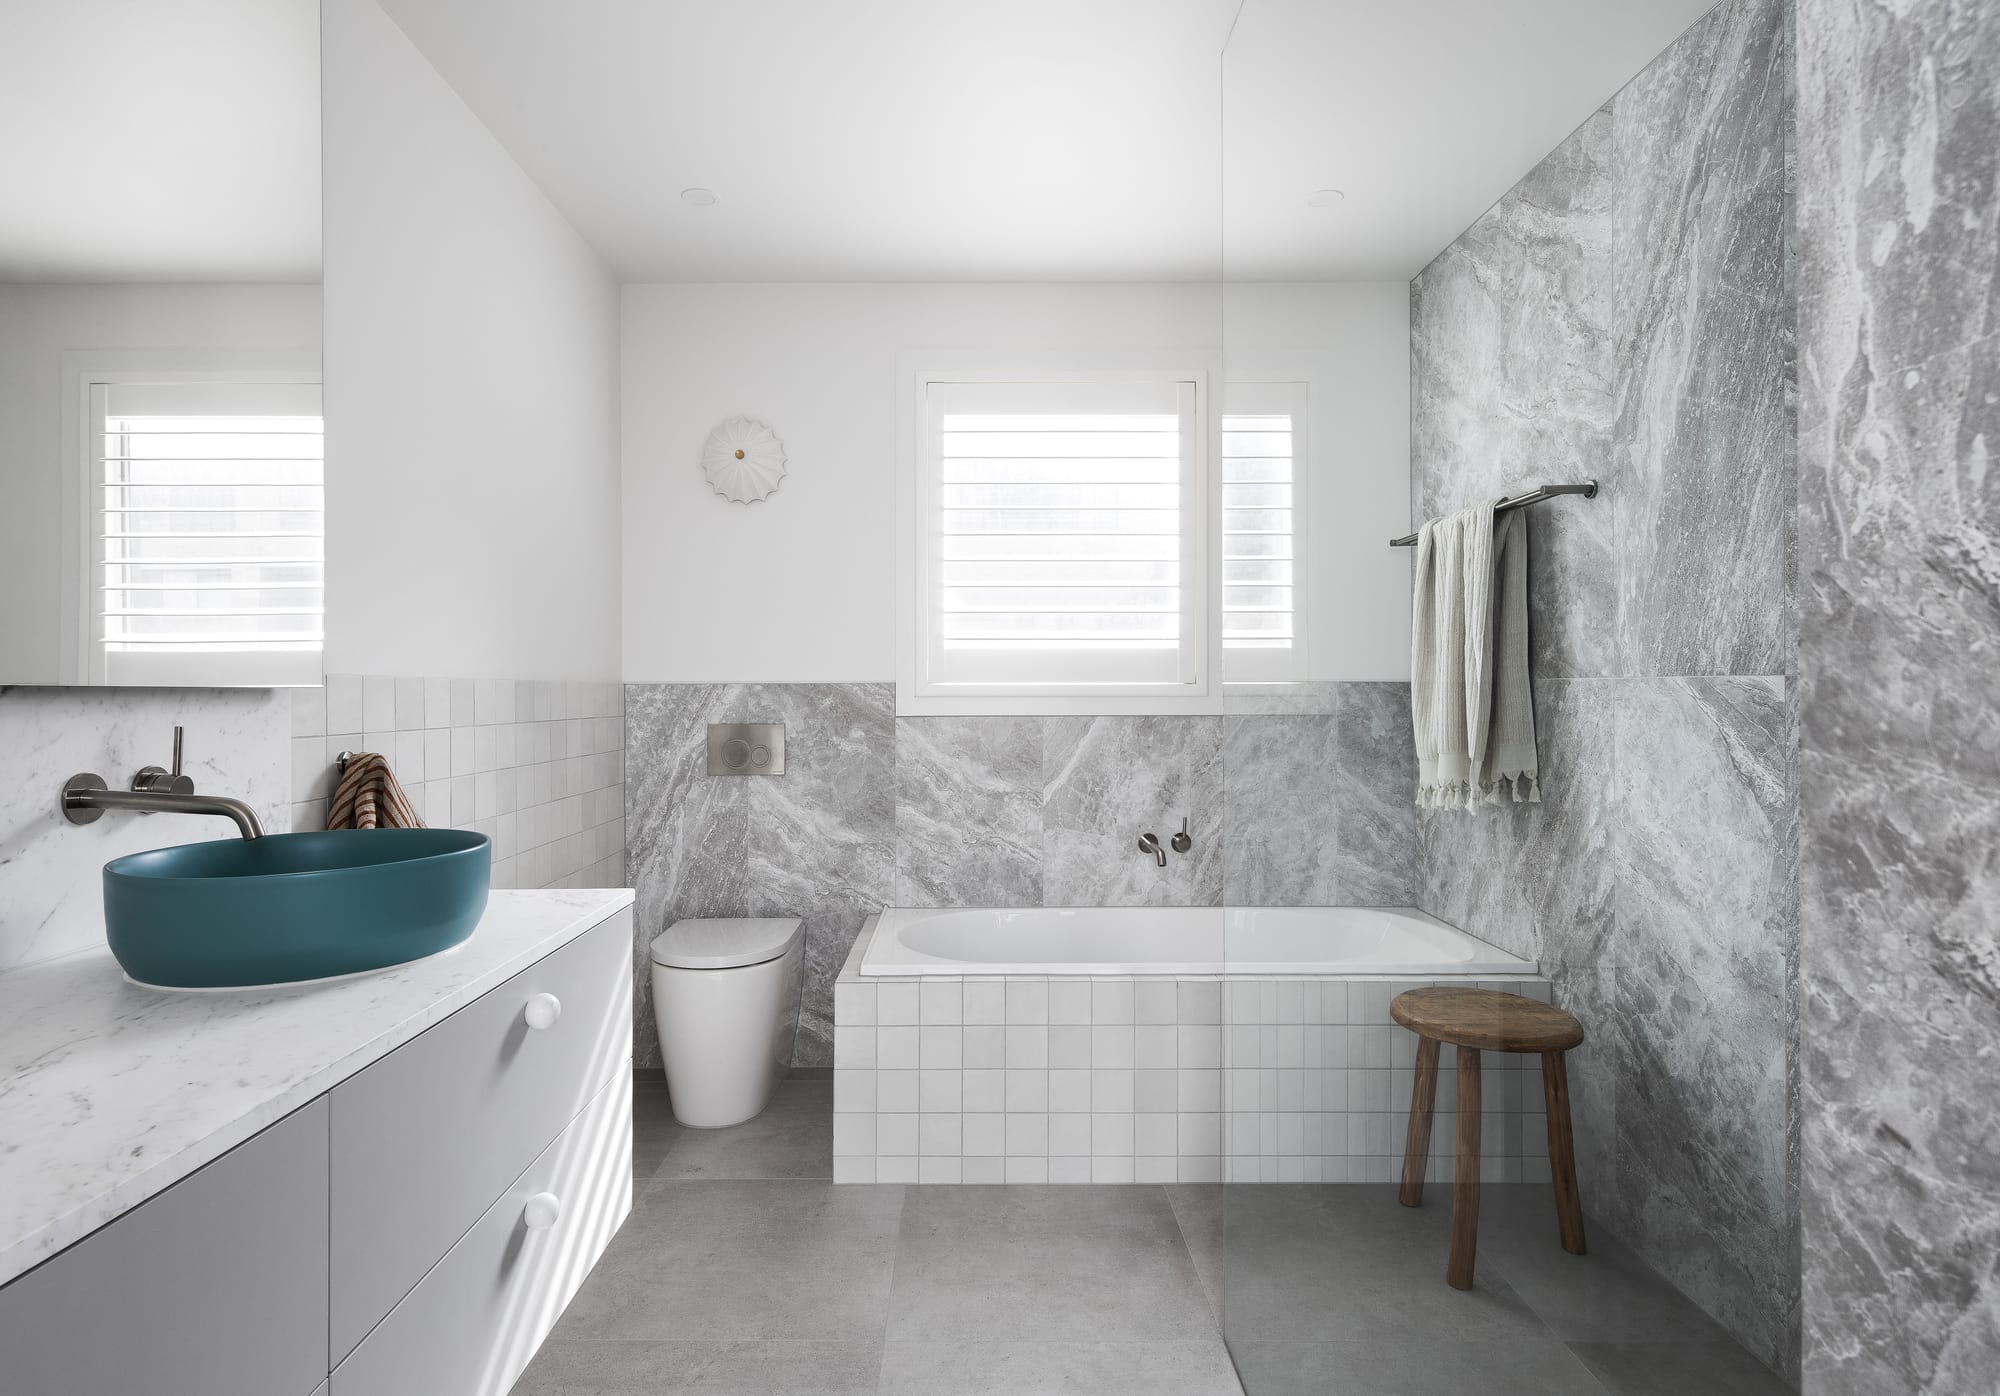 Stead House by Hannaford Design Studio. Photography by Emily Bartlett. Landscape shot of bathroom with grey floor tiles, grey marble wall tiles and white tiled bath. Blue sink on grey cabinets.